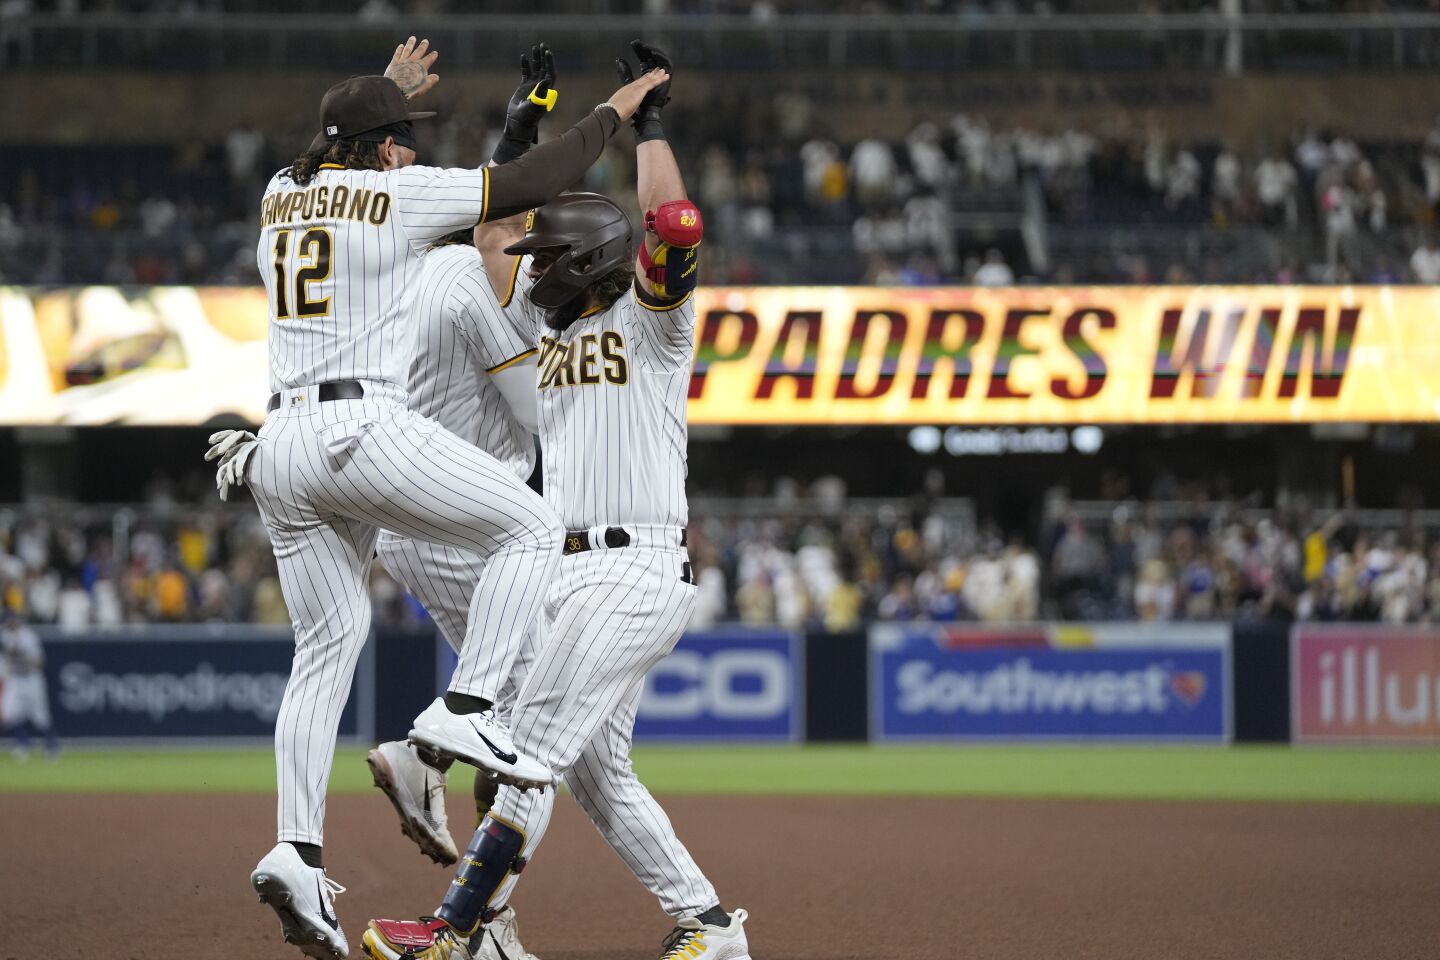 San Diego Padres (86-70, 2nd in NL West)The Padres dropped another series to the Dodgers, but their magic number dropped to three anyway as the Phillies have lost five in a row and the Brewers lost again Thursday. Any combination of three Padres wins or Brewers losses will clinch the first full-season playoff berth since 2006. Because the Phillies have the head-to-head tiebreaker, the magic number is 4 if Philadelphia, a half-game ahead of Milwaukee.